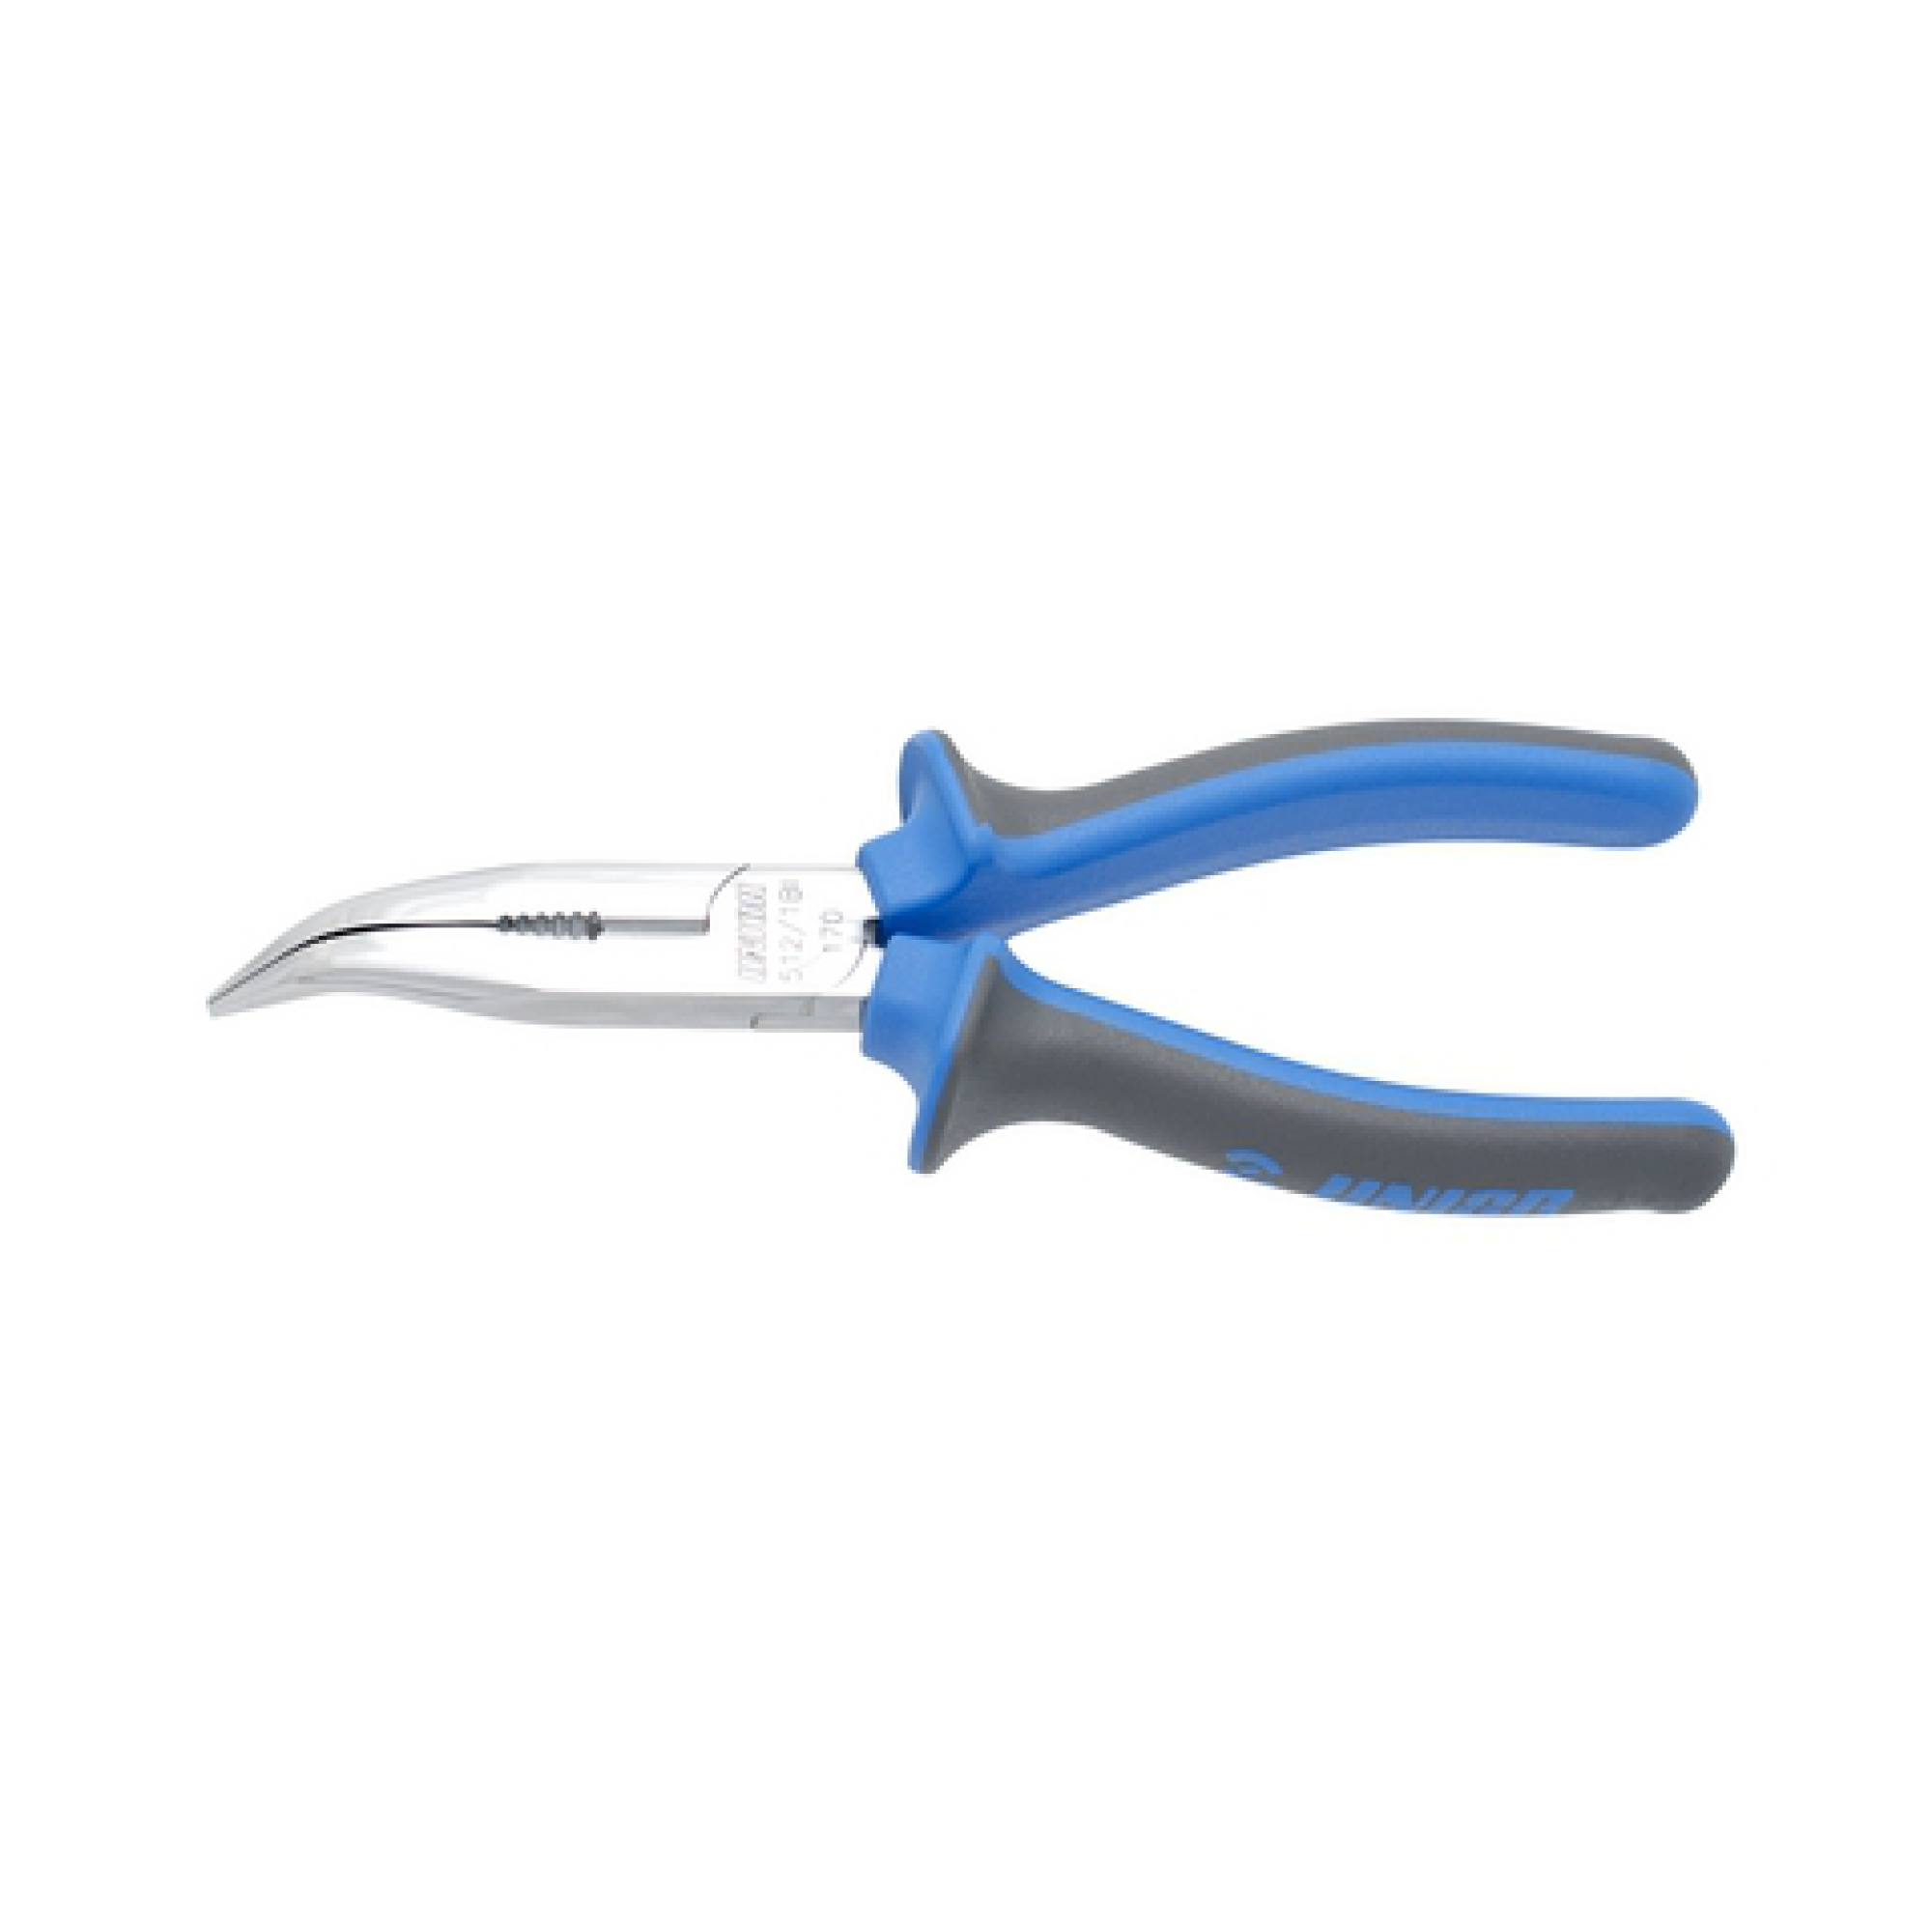 Long nose pliers with side cutter and pipe grip, bent